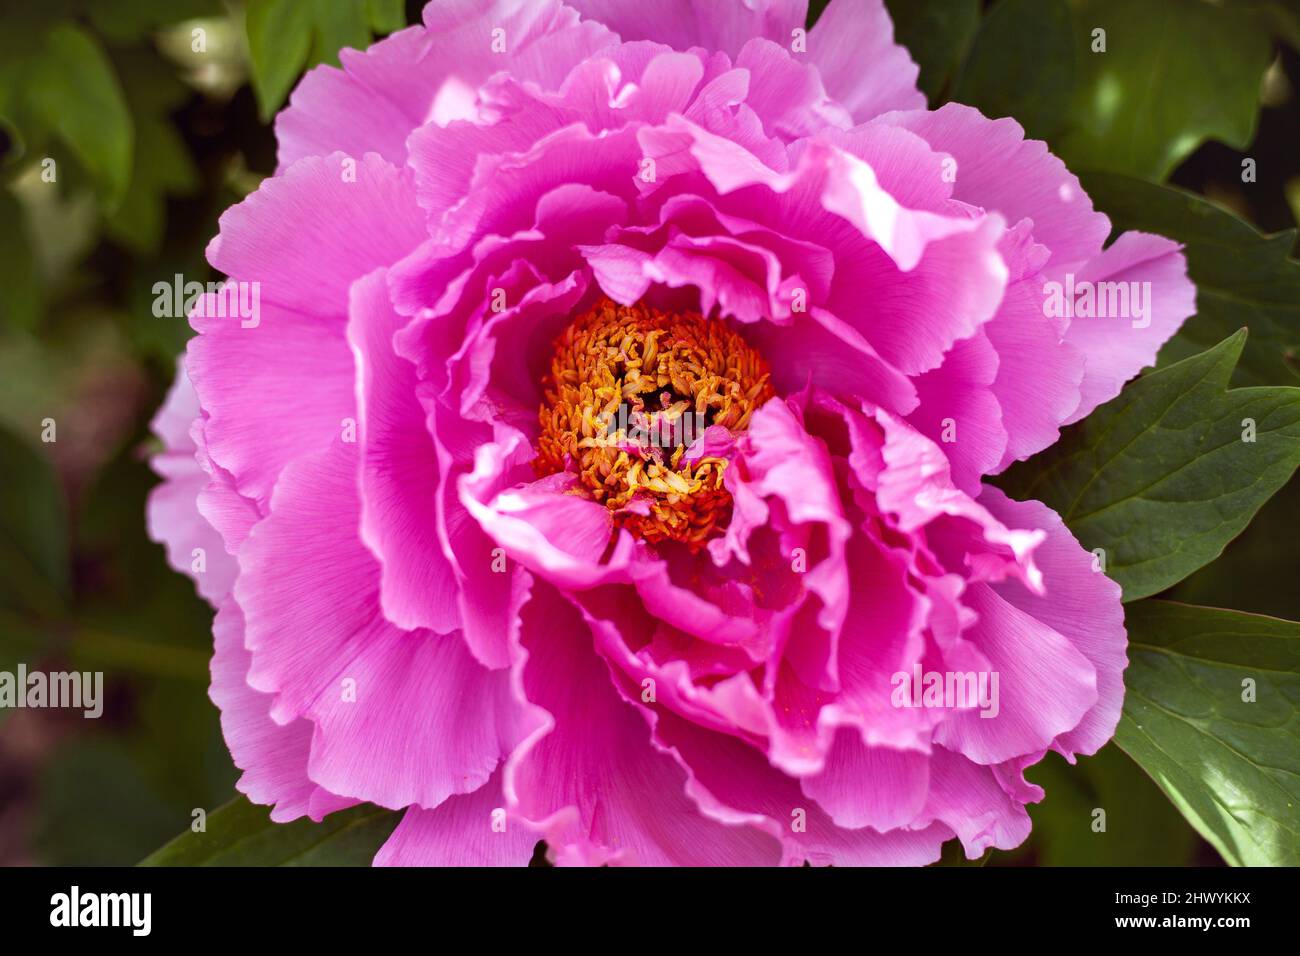 Floral spring or summer background. Pink tree peony flower close-up. Stock Photo